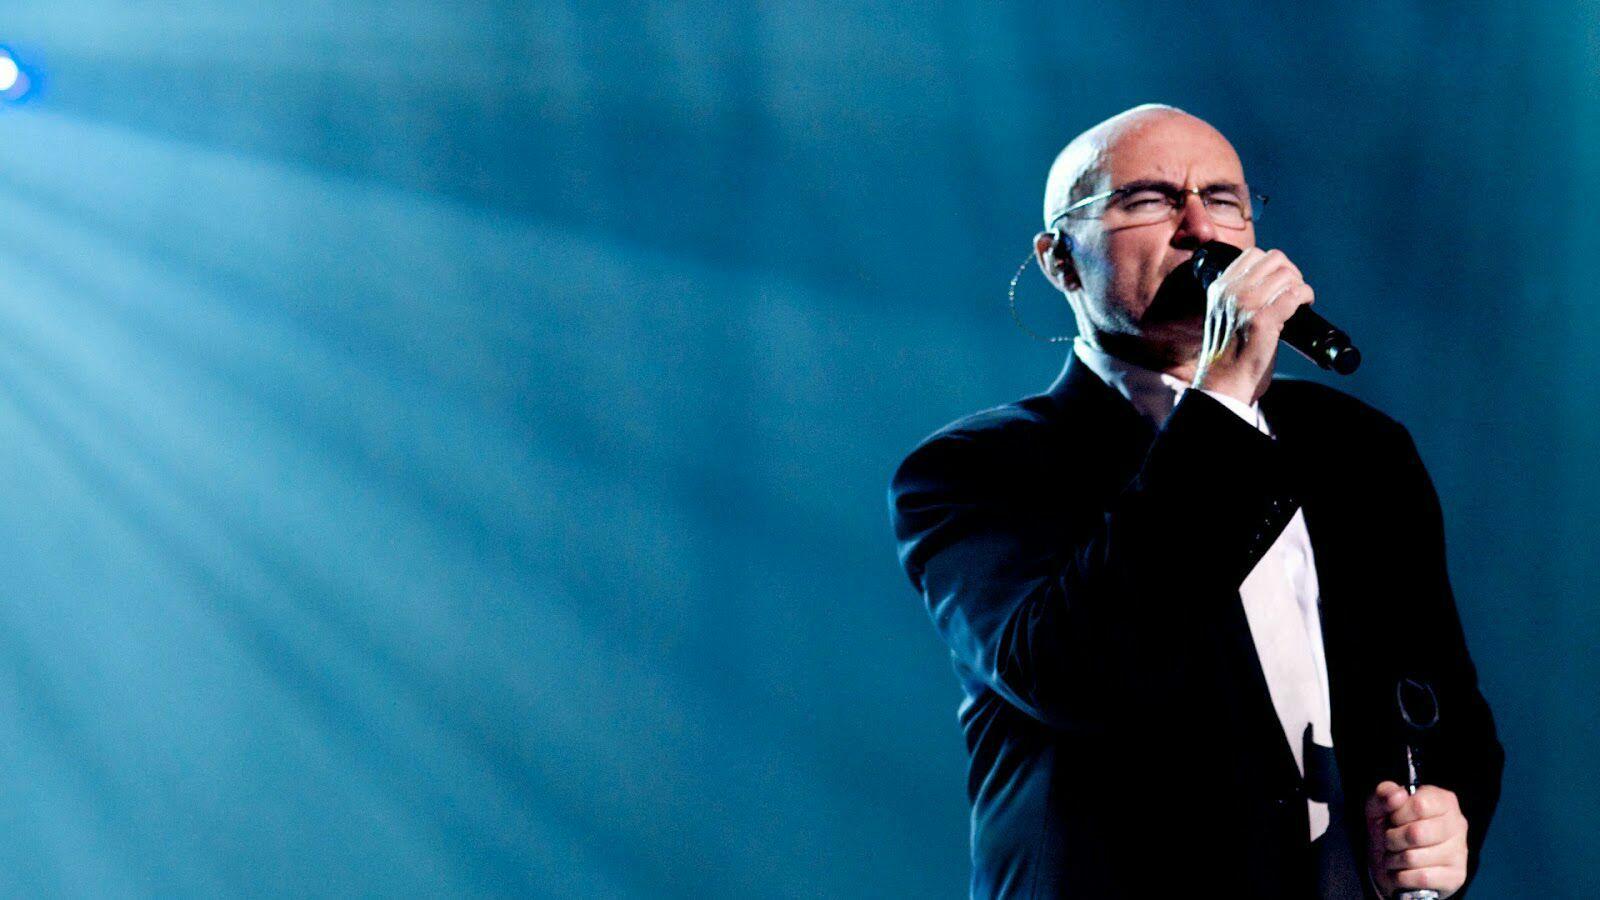 Download Best Phil Collins Song With High Quality Audio